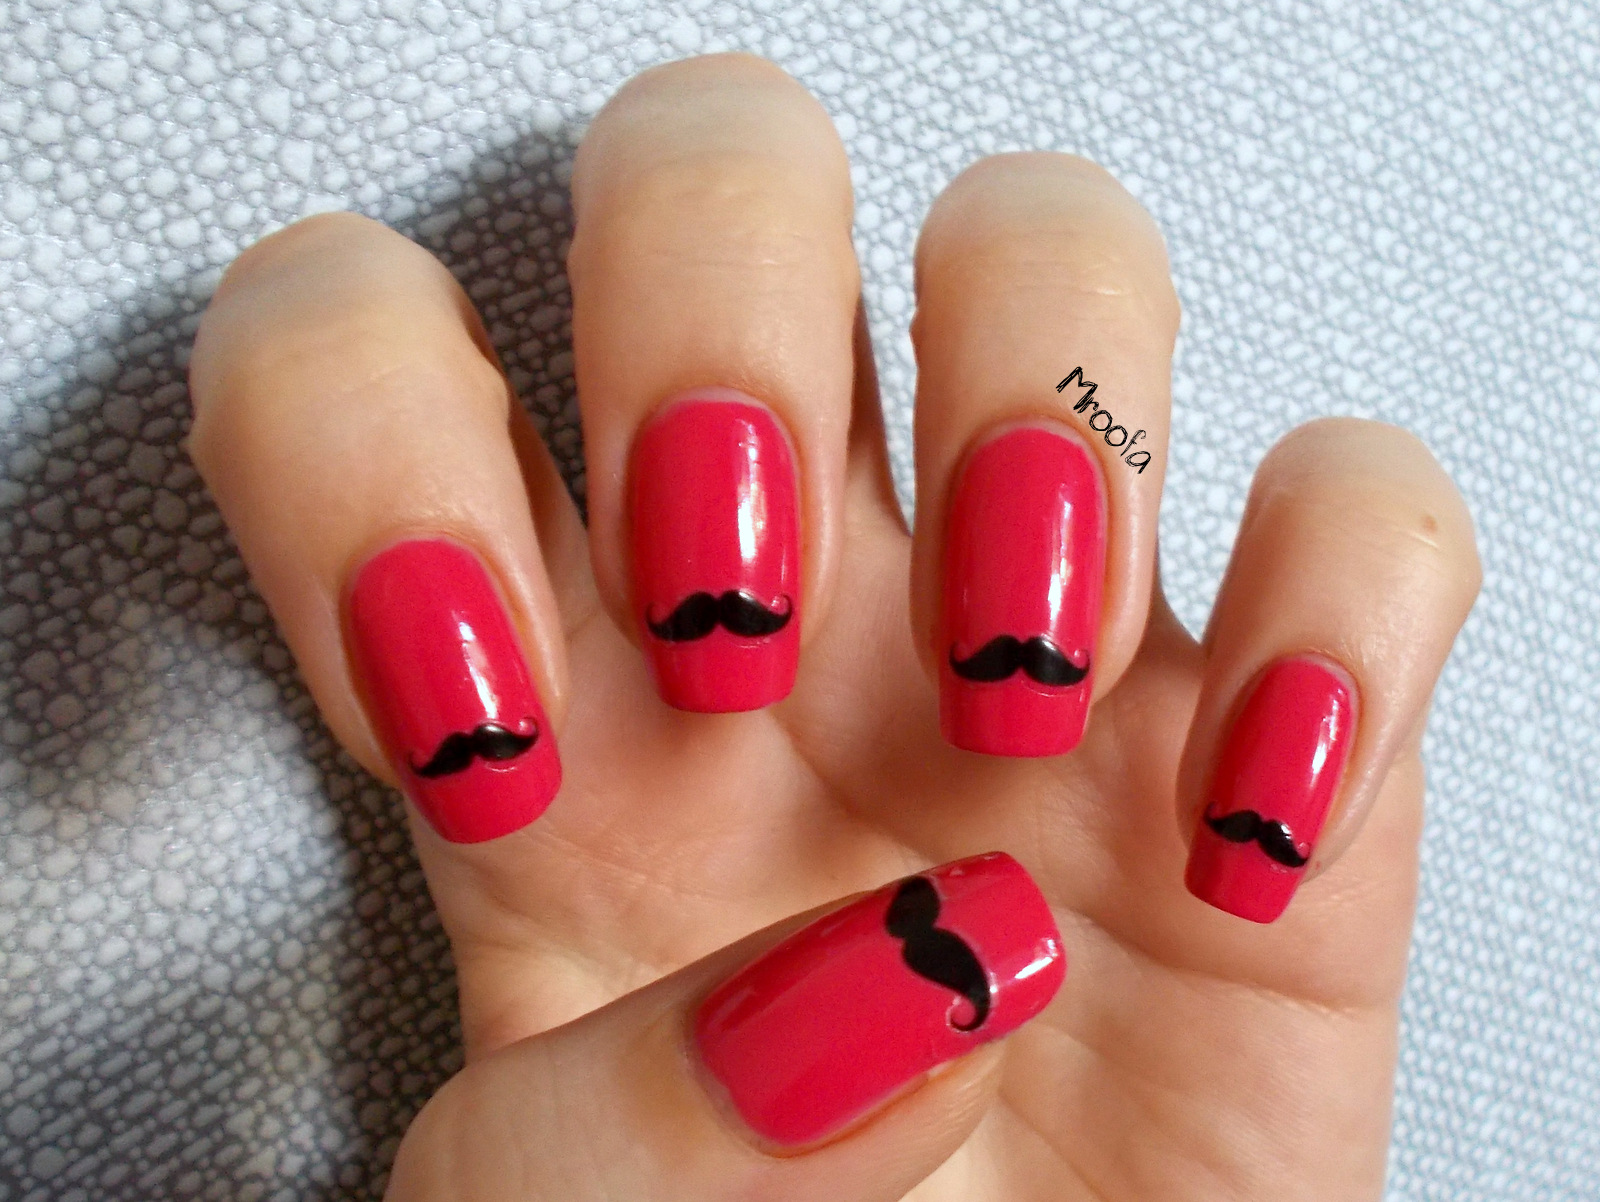 Mustache Nail Art for Short Nails on Pinterest - wide 10